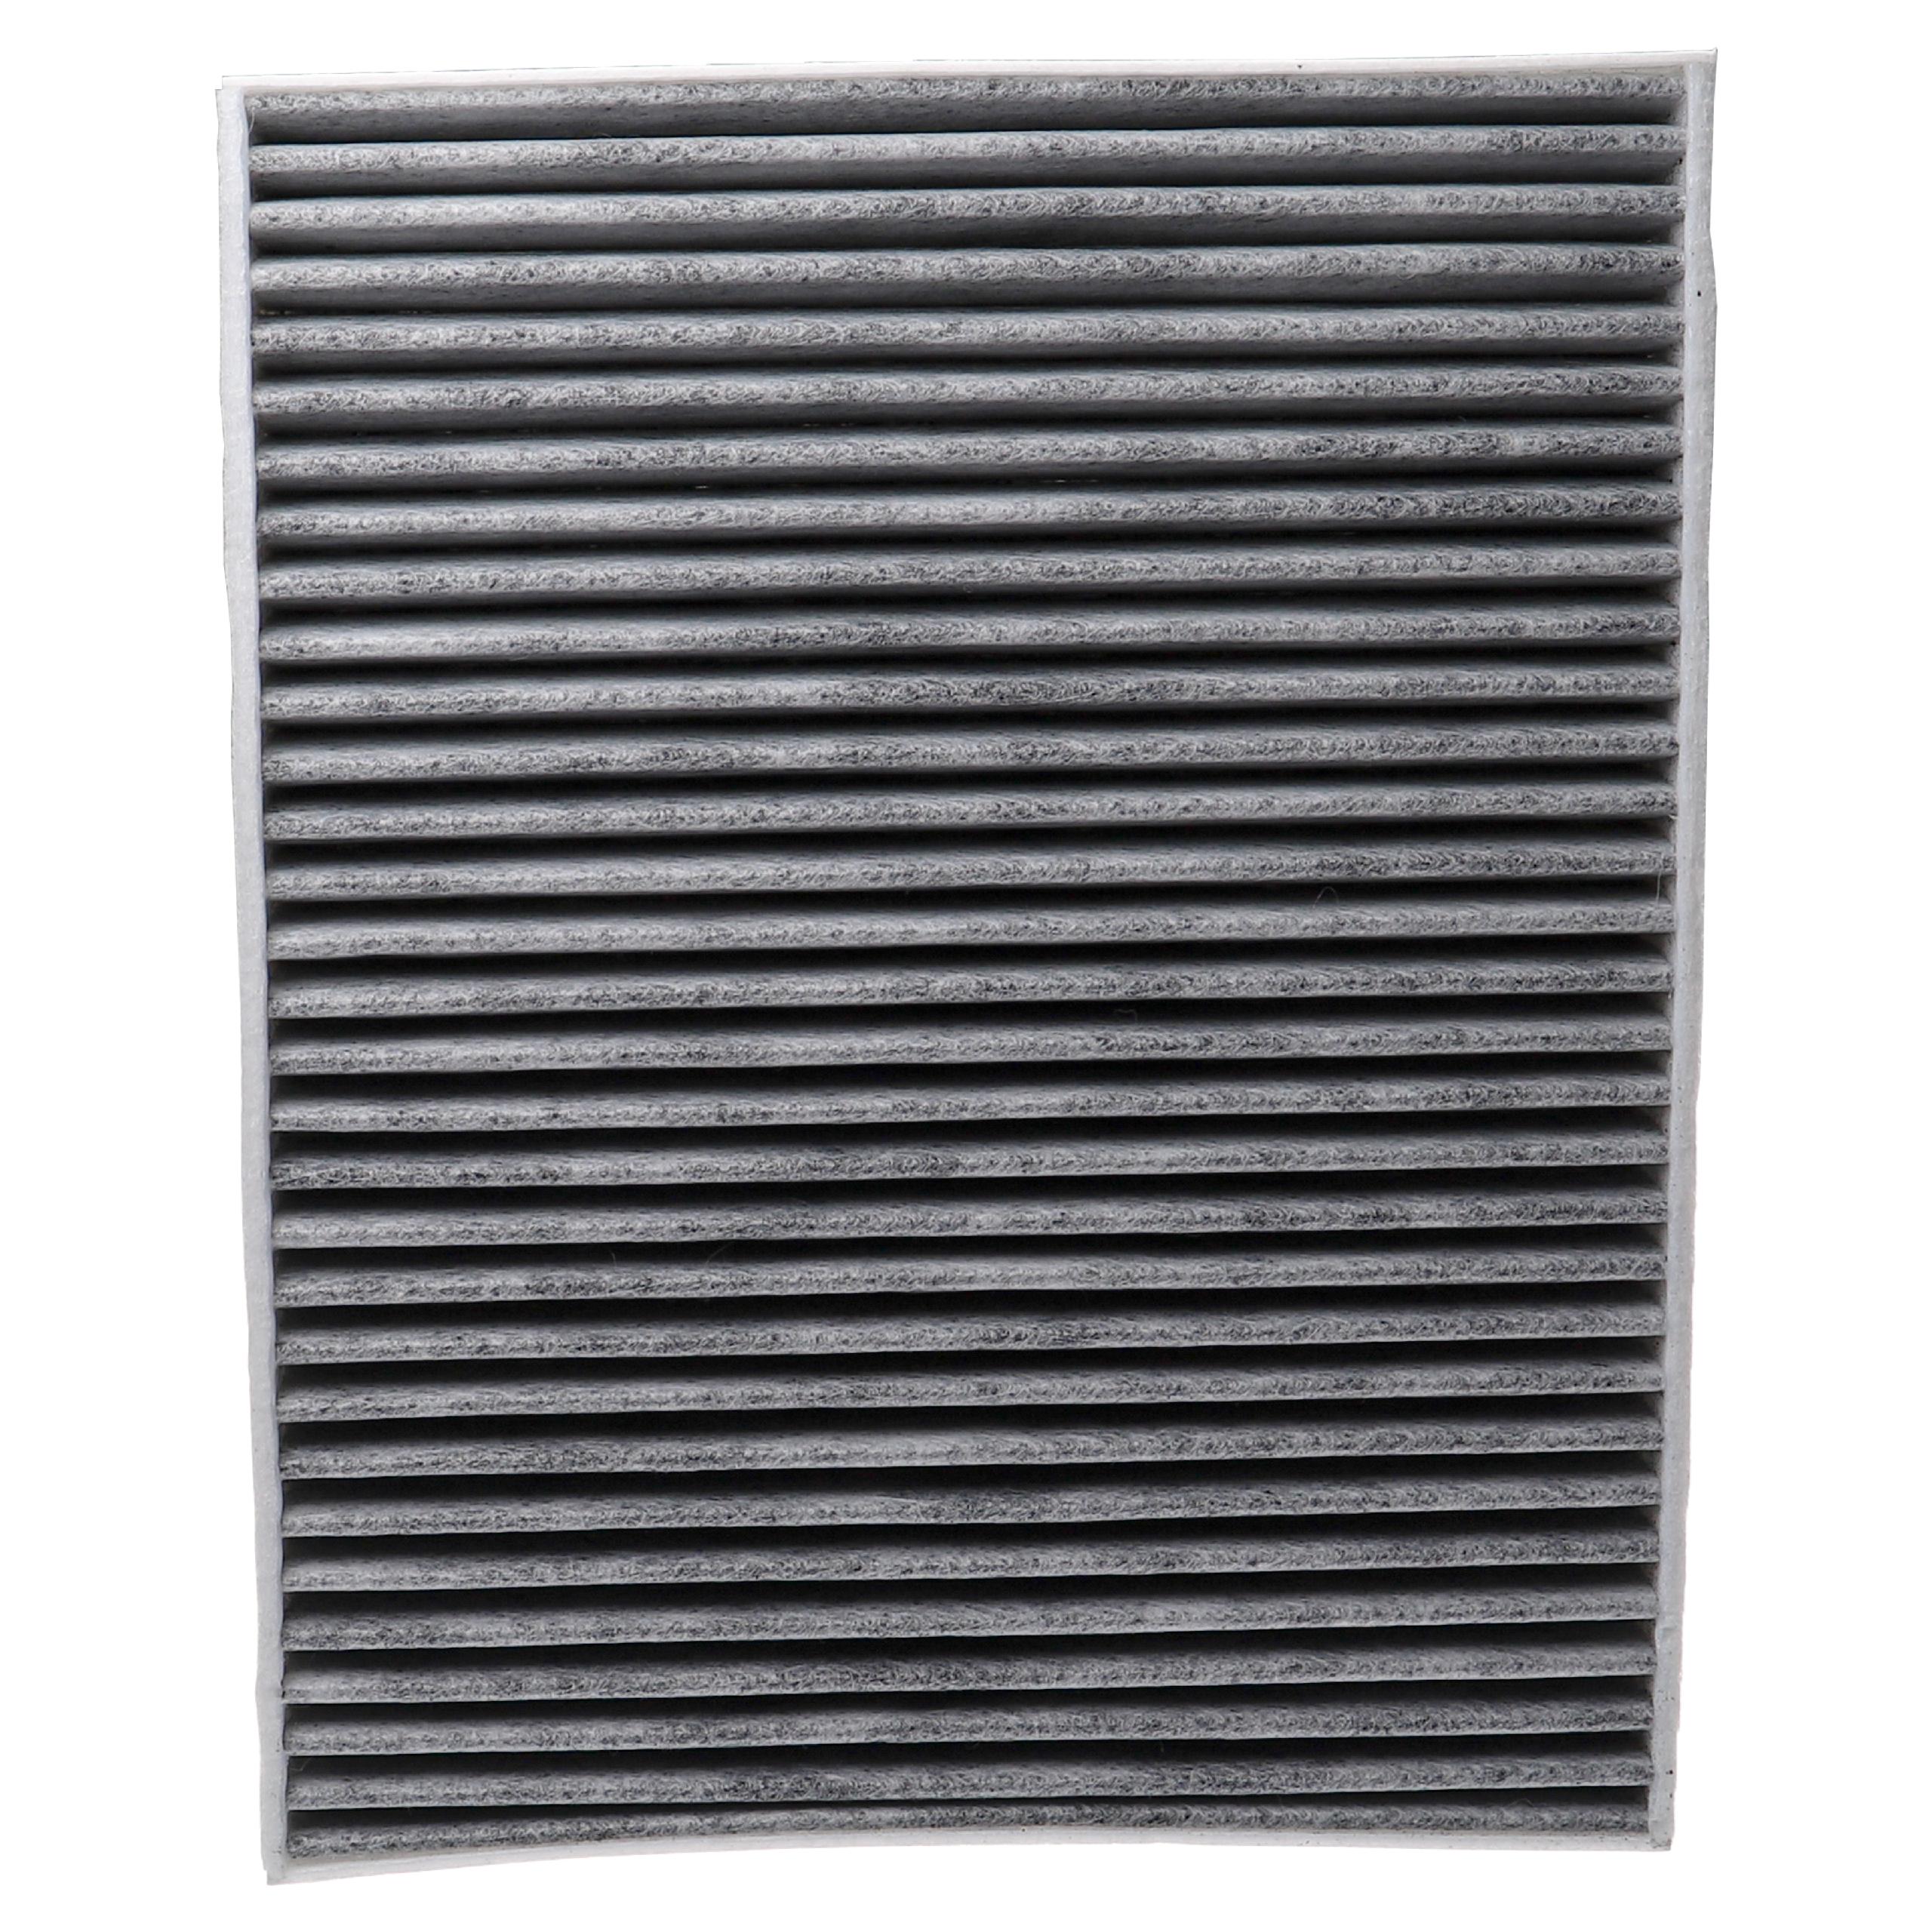 Cabin Air Filter replaces 1A First Automotive C30218 etc.